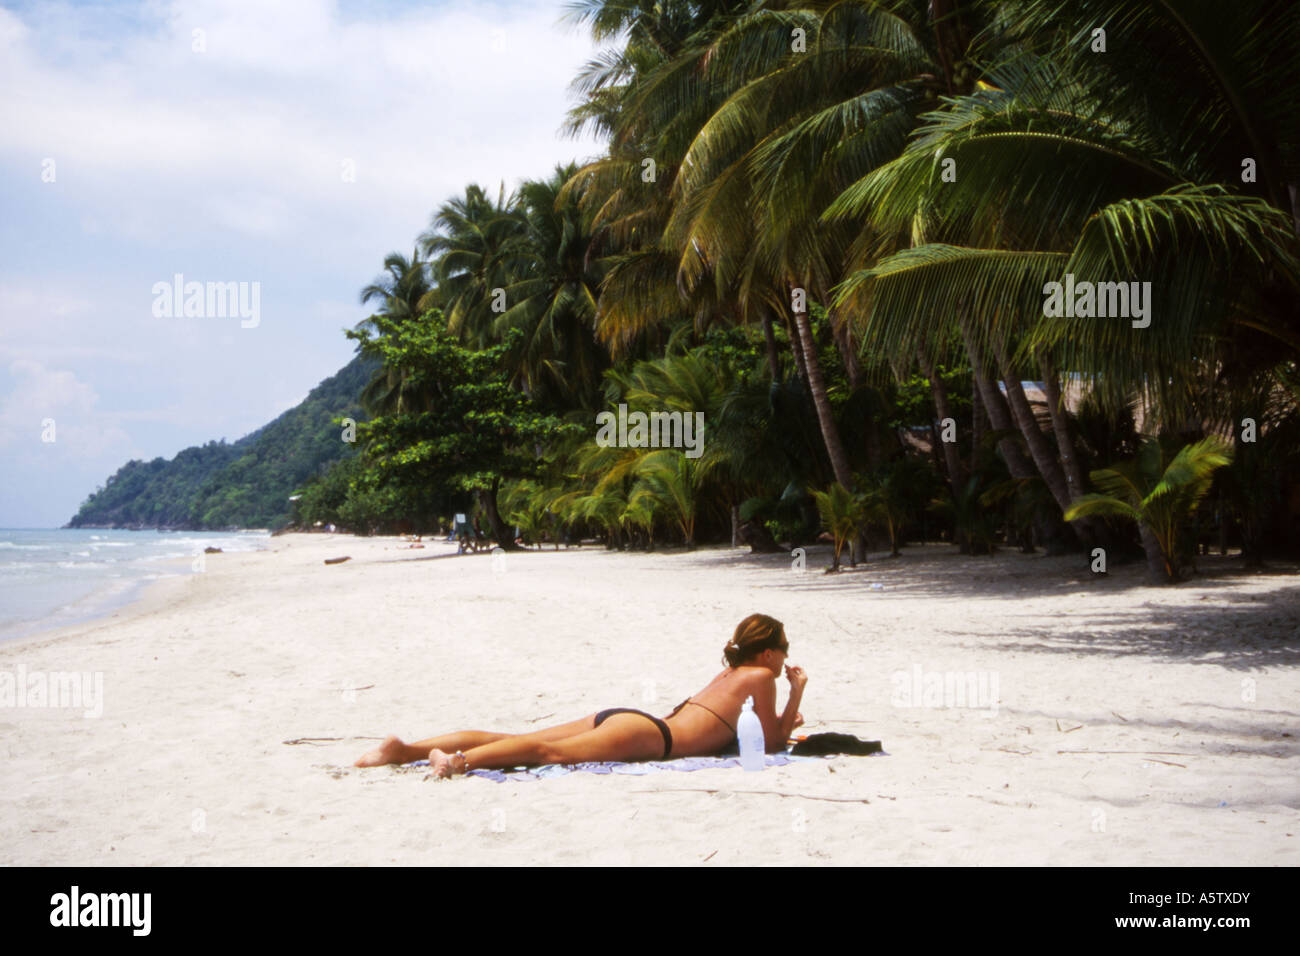 Slim western female tourist sunbathes on a deserted beach edged with palm trees,Koh Chang,Thailand. Stock Photo